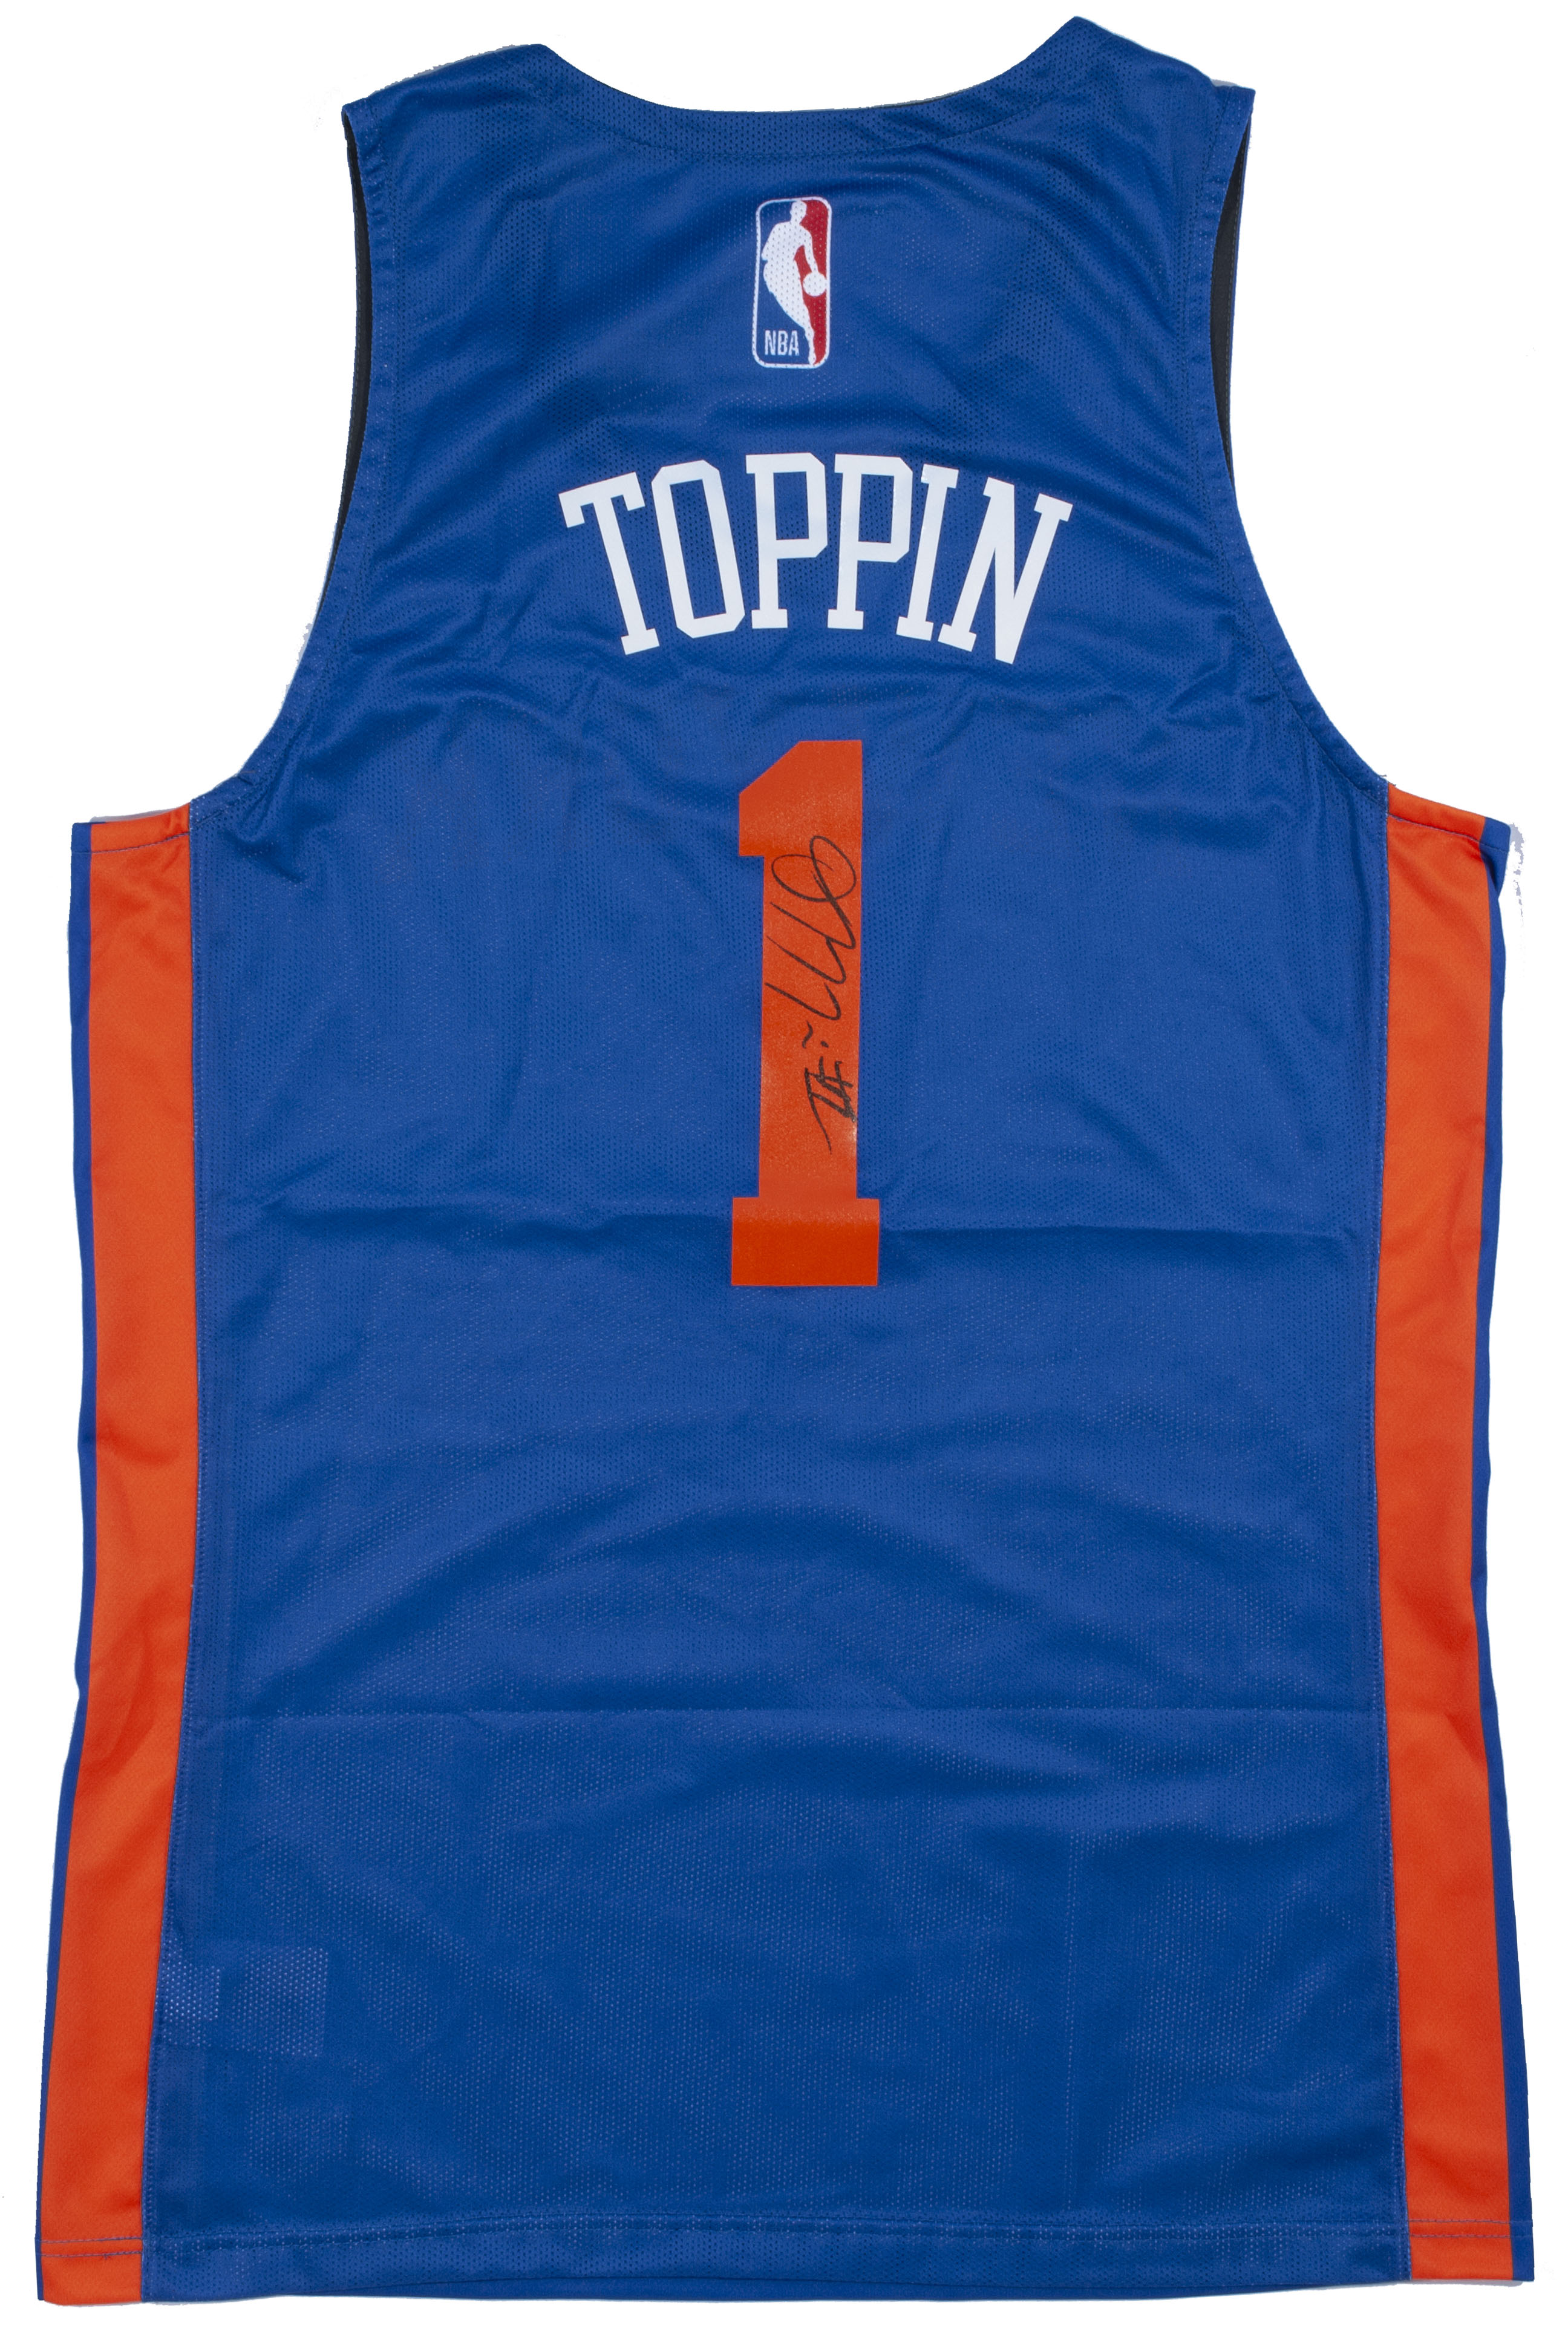 1 Obi Toppin Package - Autographed Player-Worn Playoffs Warm-Up Shirt